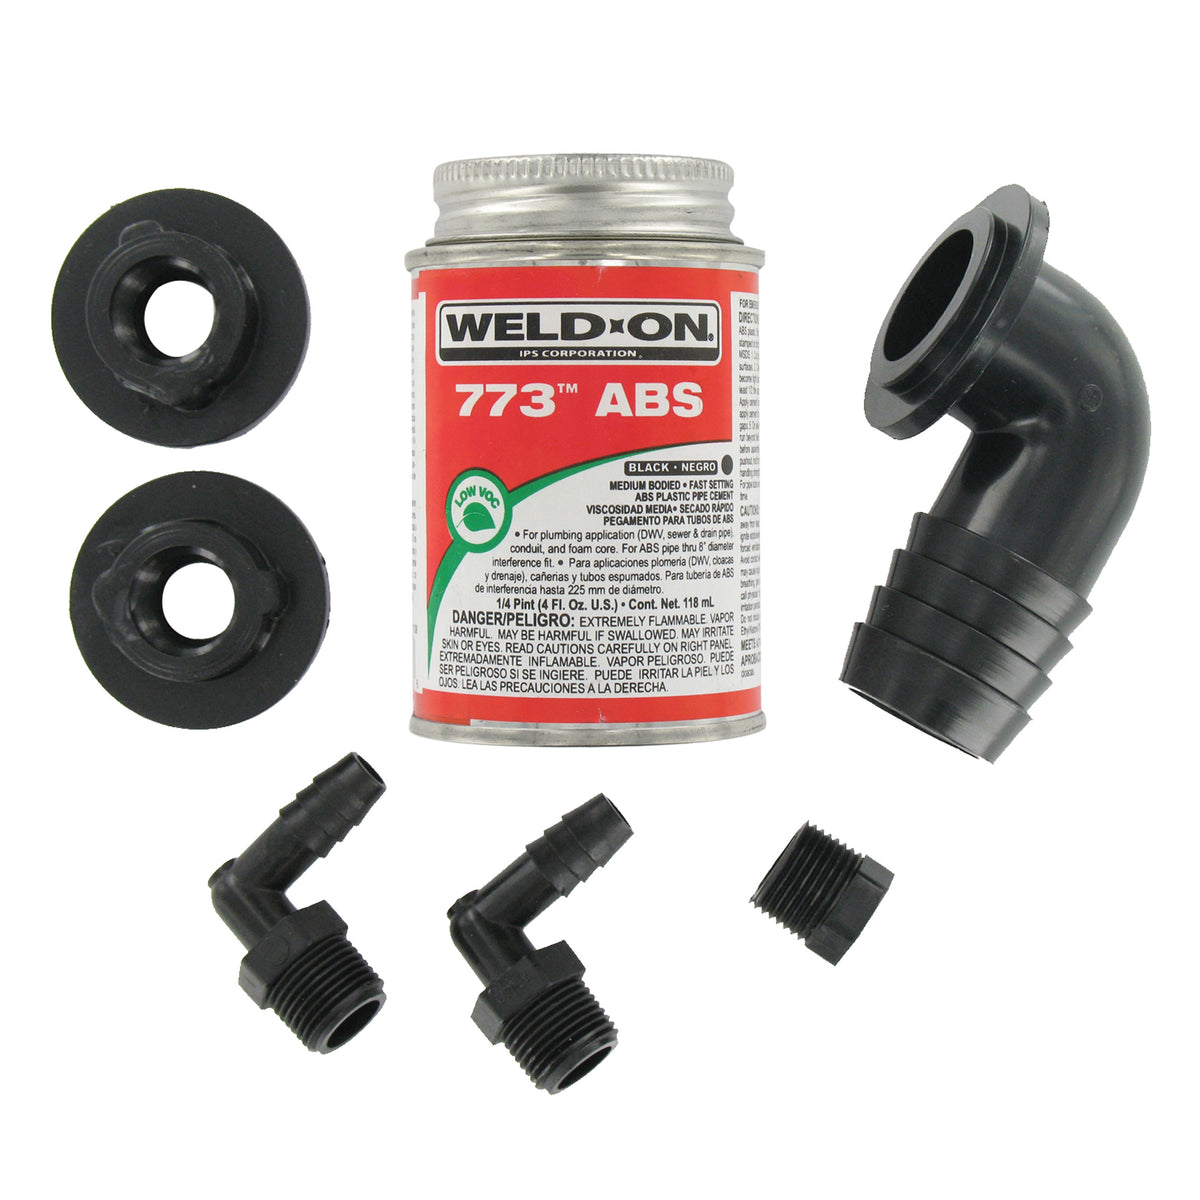 Valterra RK907 ABS Tank Fill Kit - 90Â° Barbed Fill with Cement